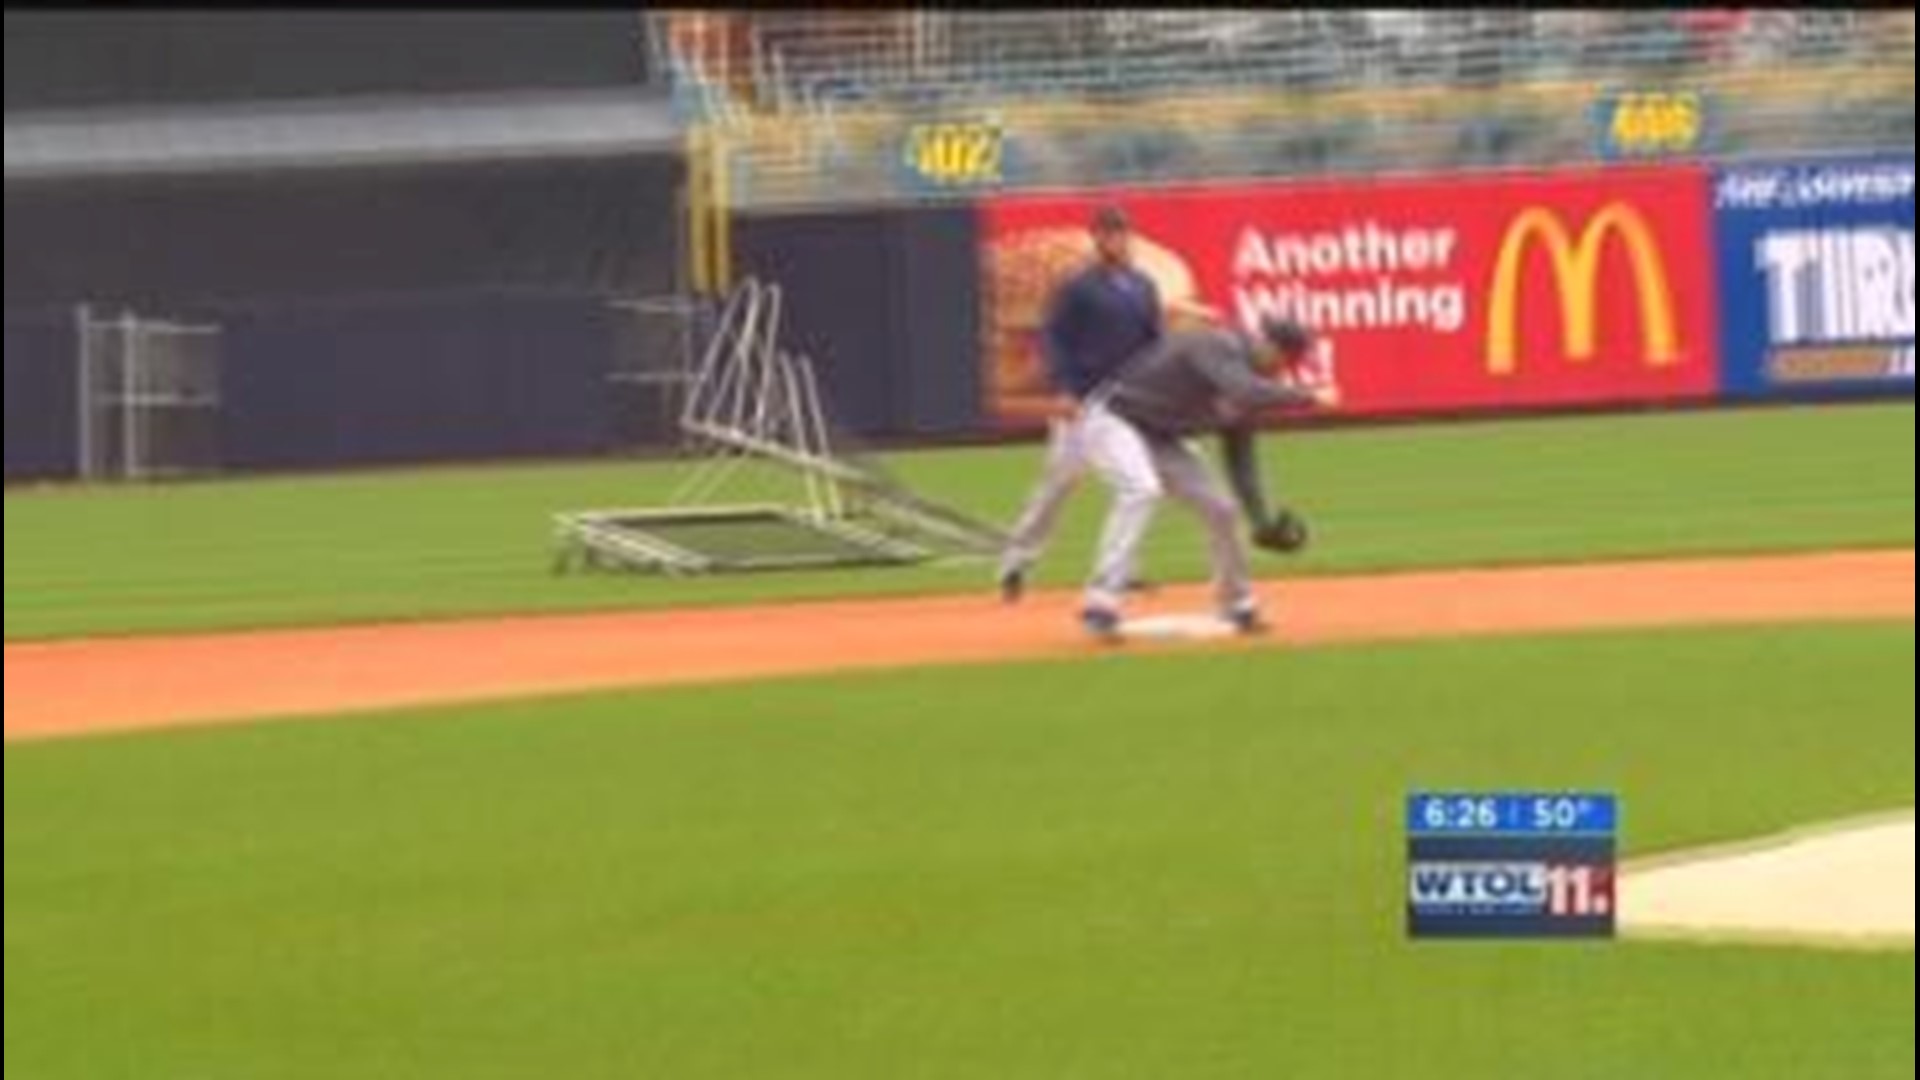 Mud Hens preparing for Opening Day